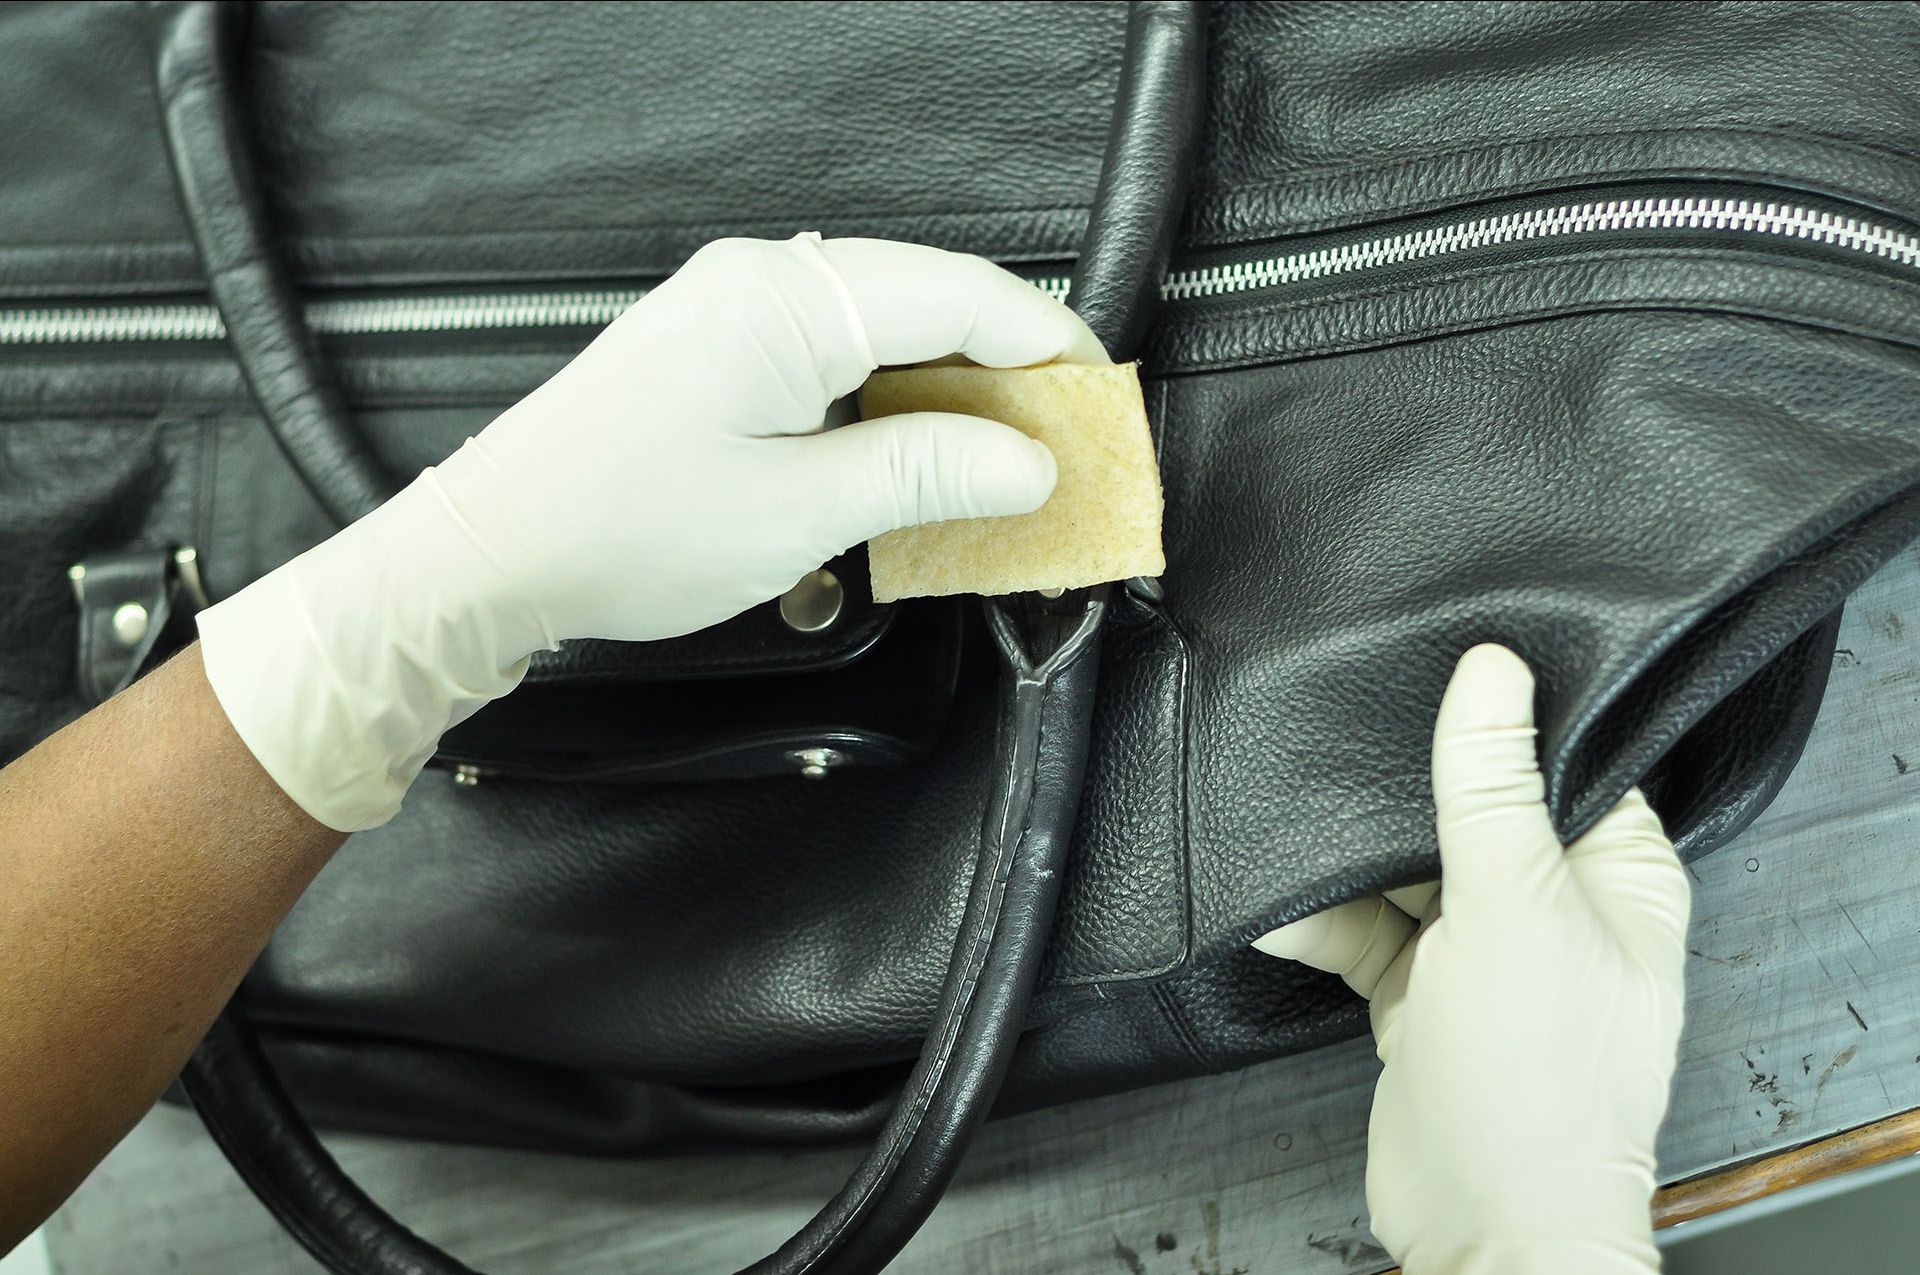 A specialist working on a leather duffle bag representing the luggage repair services of Klumpps Leather & Luggage in Grand Rapids, MI